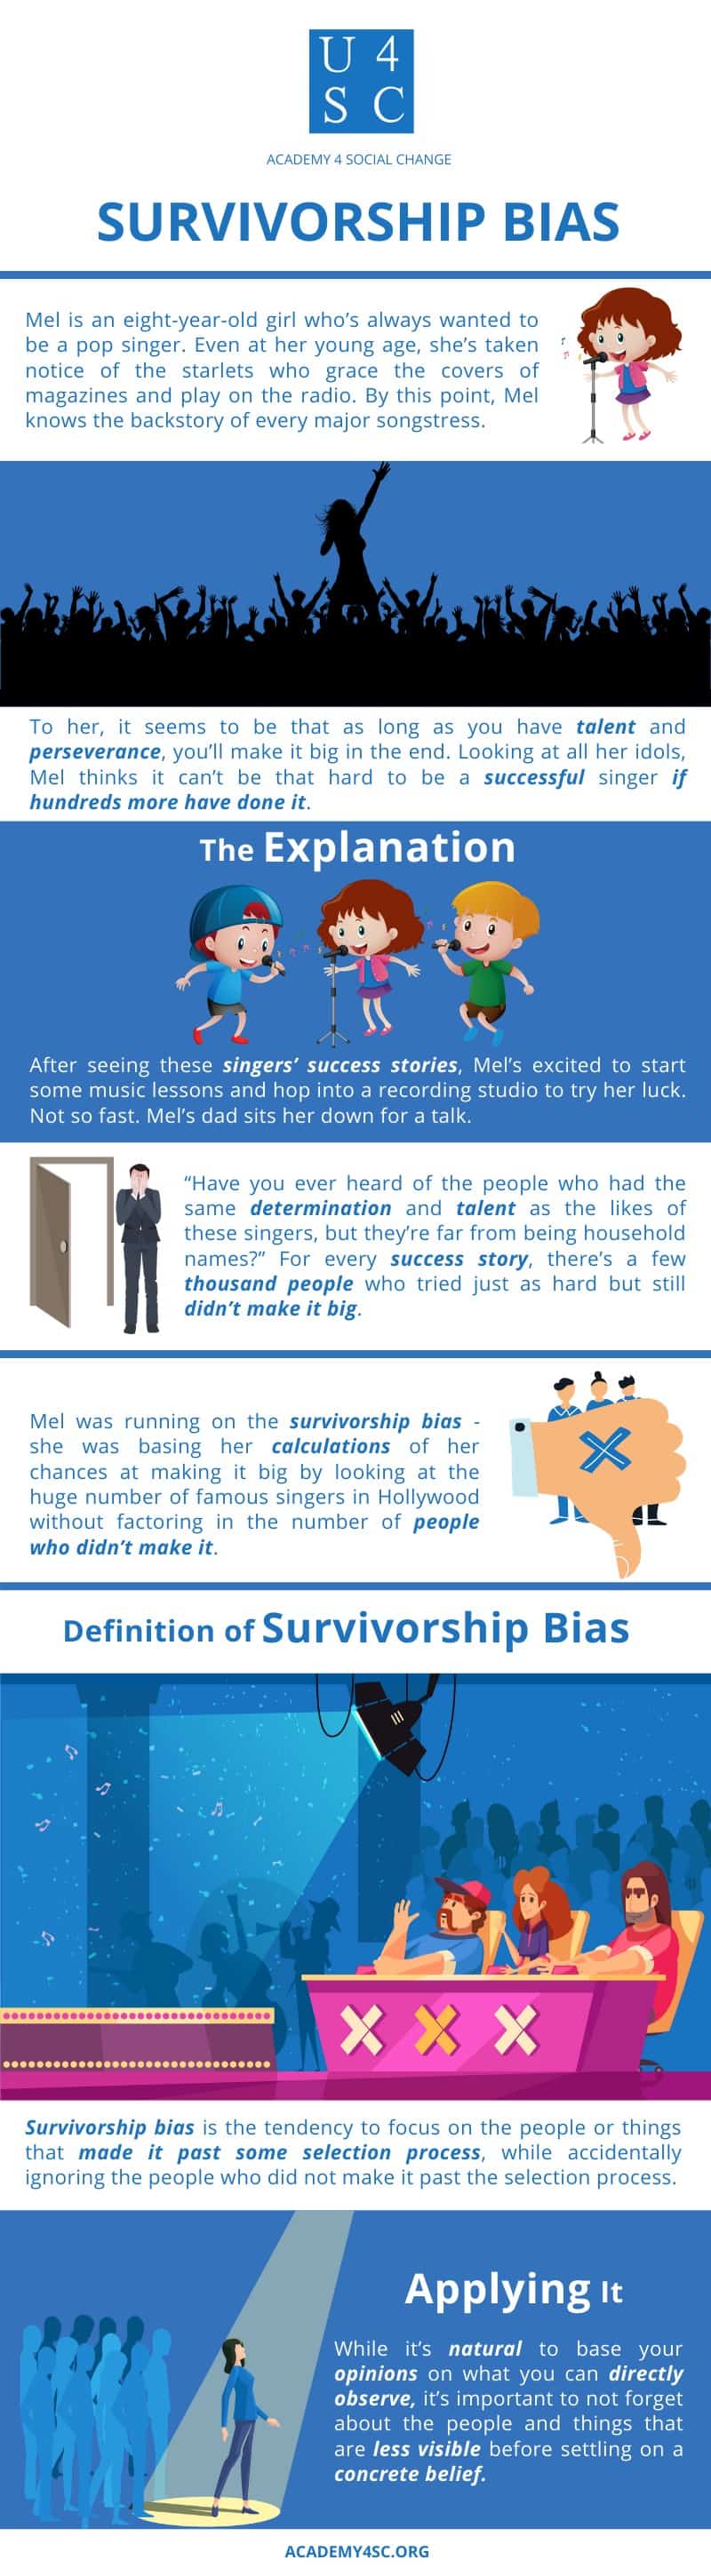 Survivorship Bias: The Exception is not the Rule